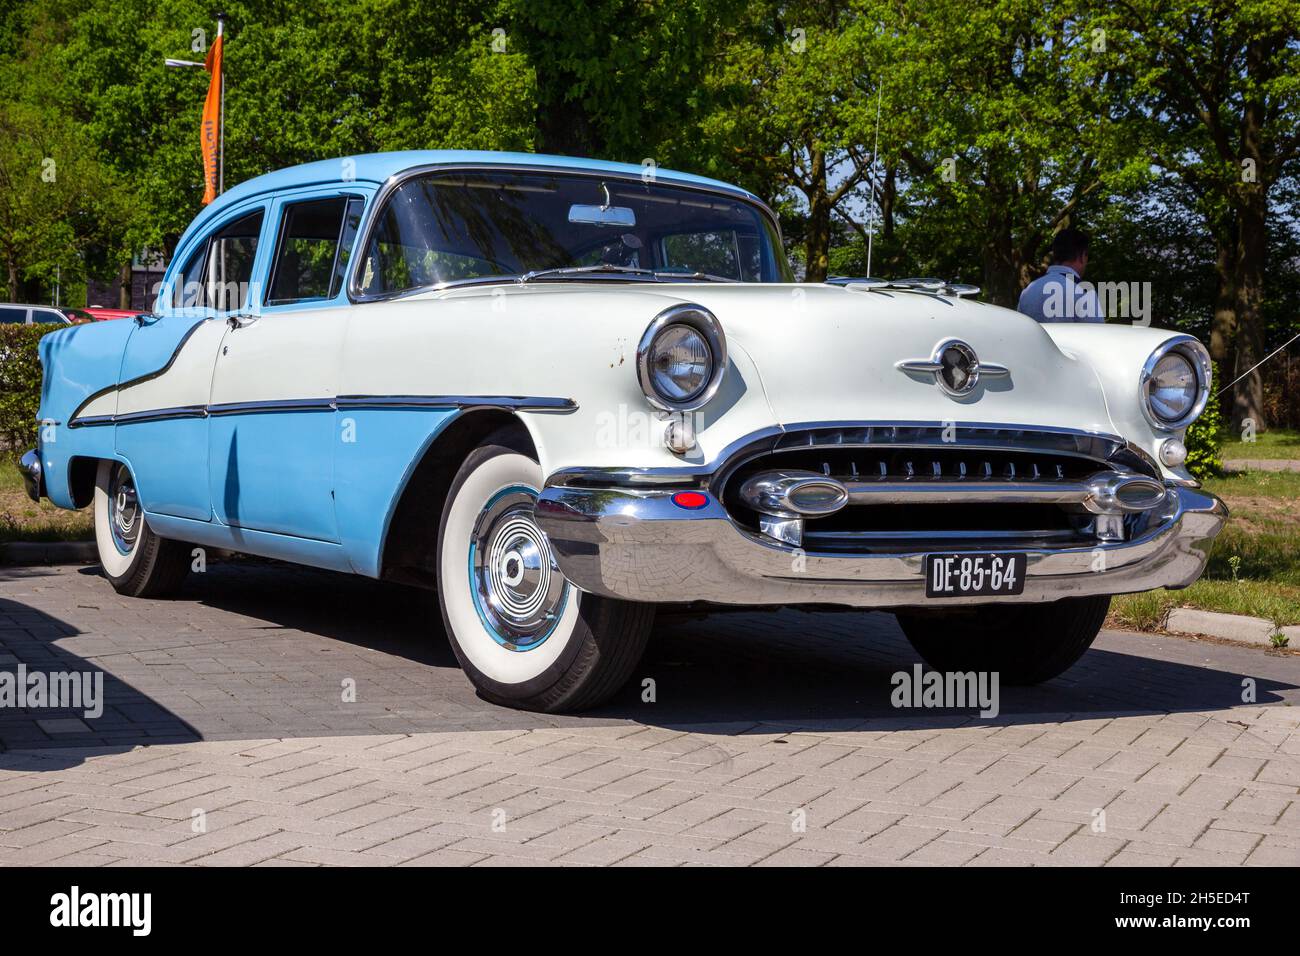 1955 Oldsmobile classic car on the parking lot during the Rock Around The Jukebox event. Rosmalen, The Netherlands - May 8, 2016 Stock Photo